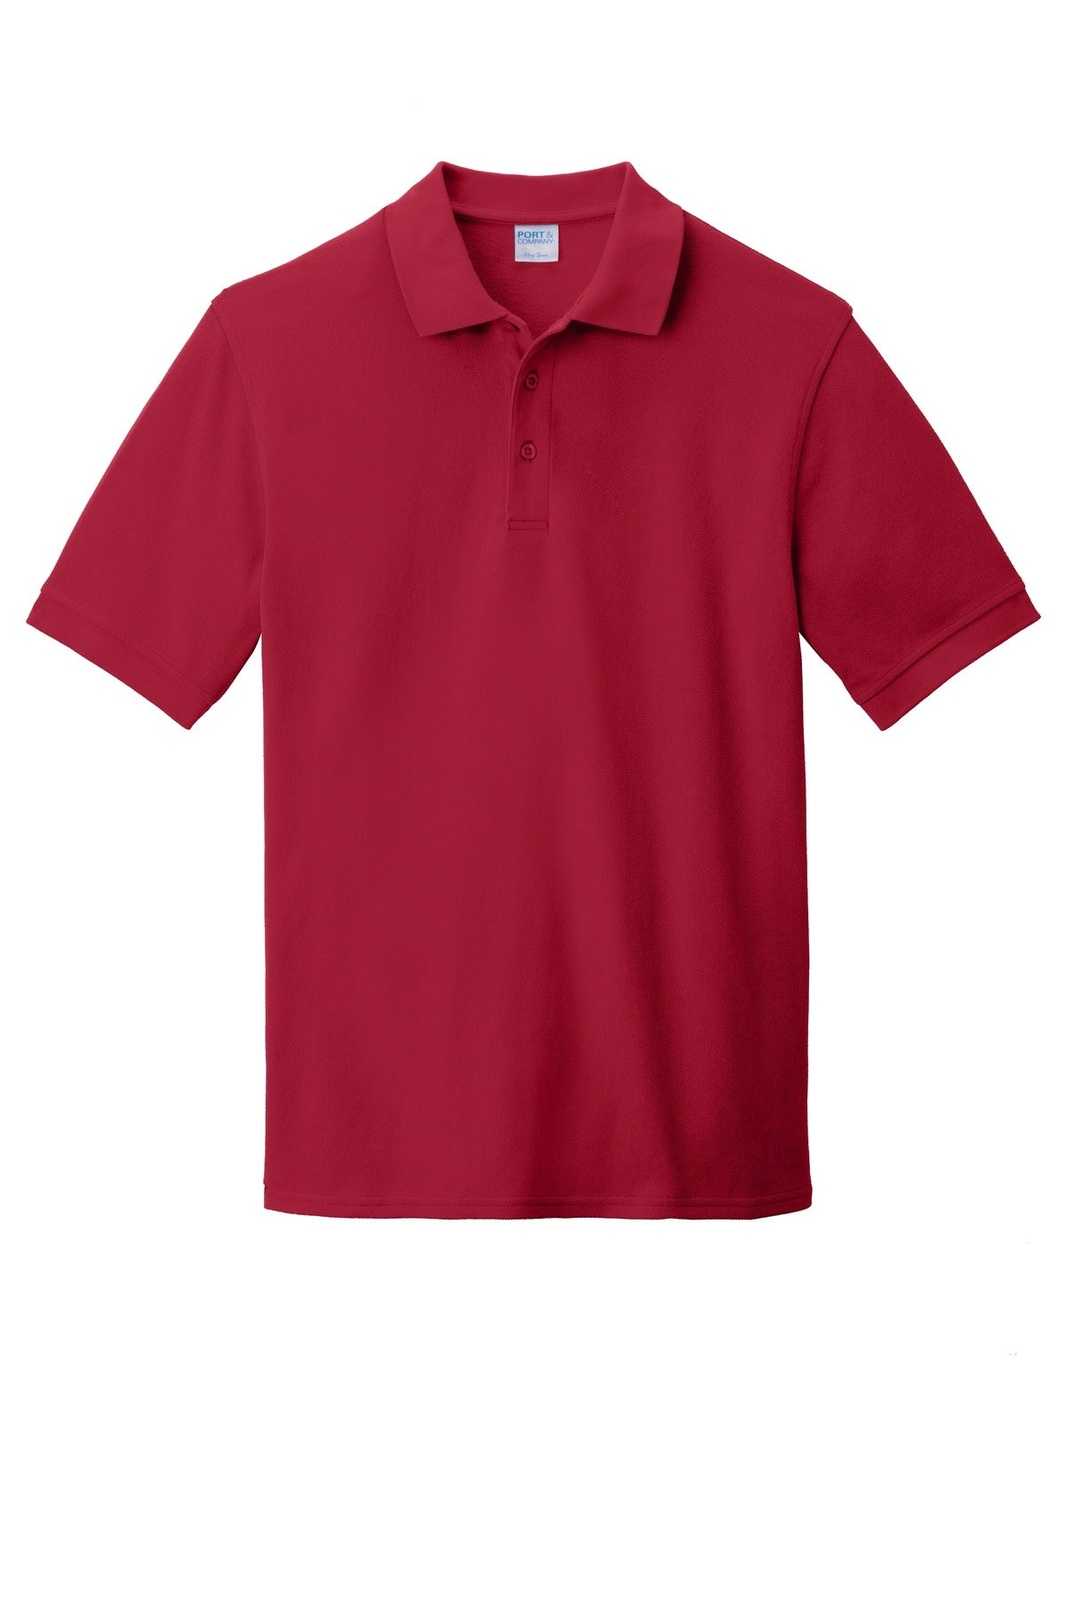 Port &amp; Company KP1500 Combed Ring Spun Pique Polo - Red - HIT a Double - 5